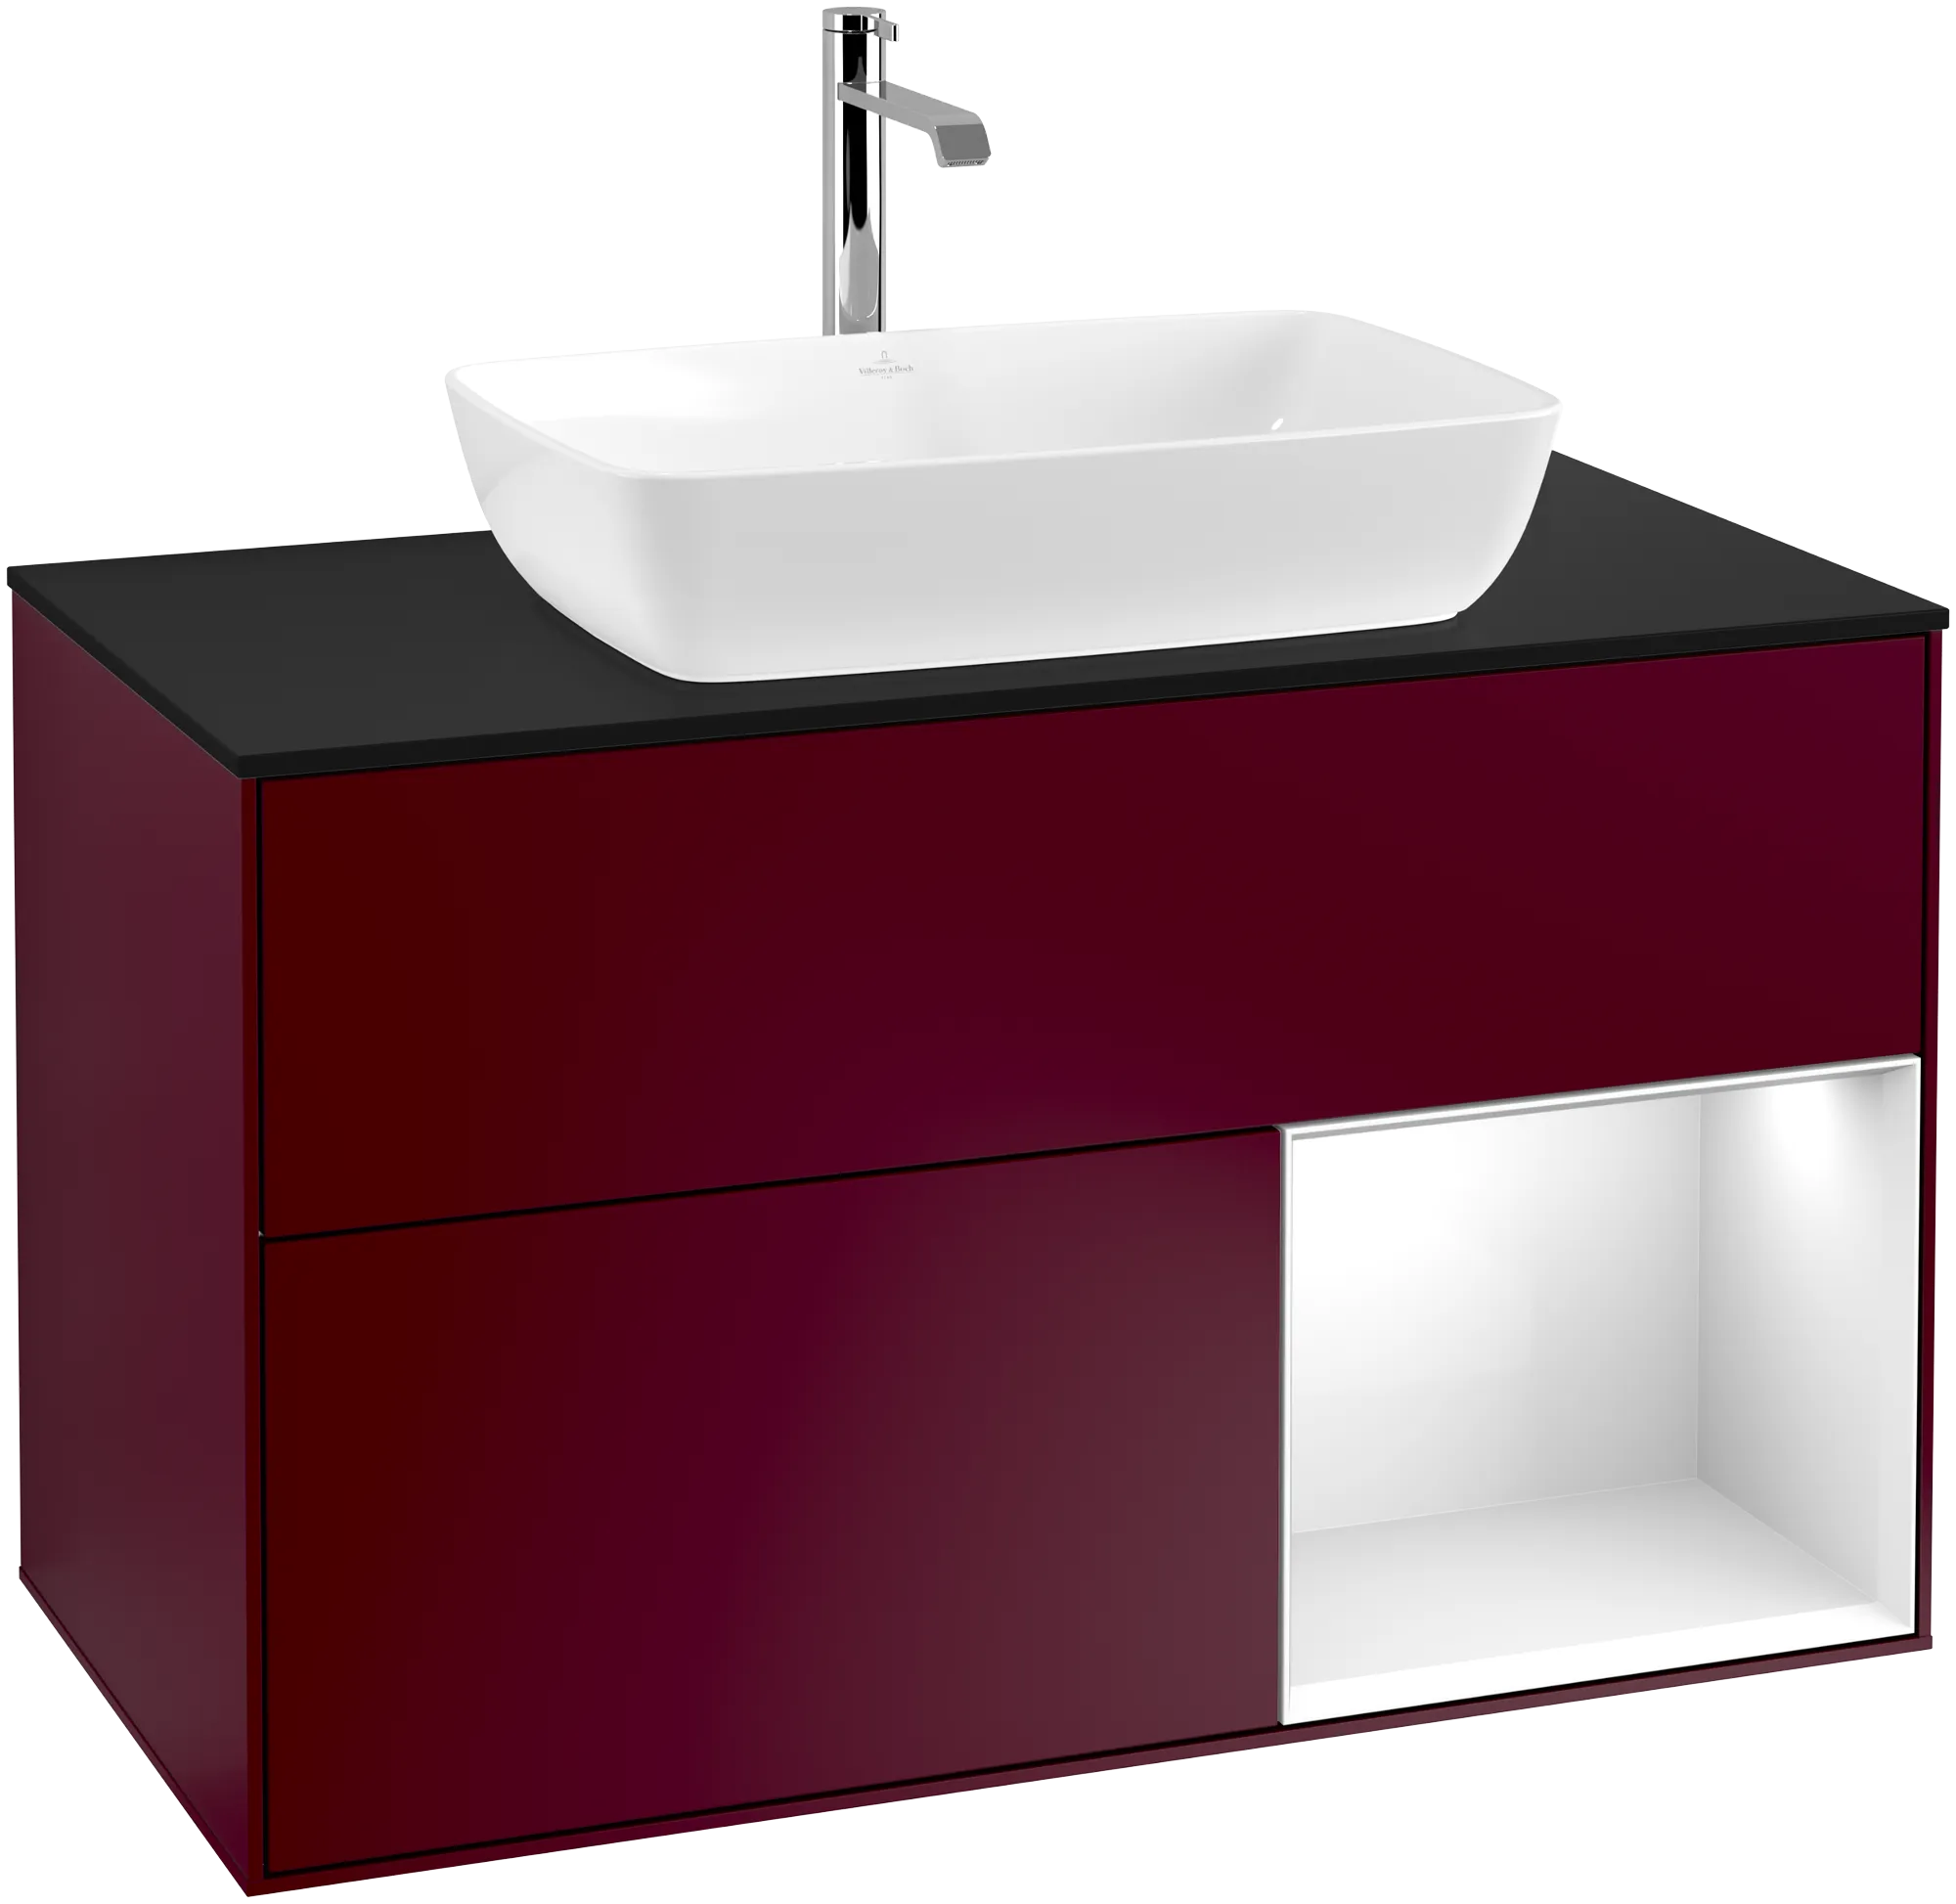 Picture of VILLEROY BOCH Finion Vanity unit, with lighting, 2 pull-out compartments, 1000 x 603 x 501 mm, Peony Matt Lacquer / Glossy White Lacquer / Glass Black Matt #G782GFHB